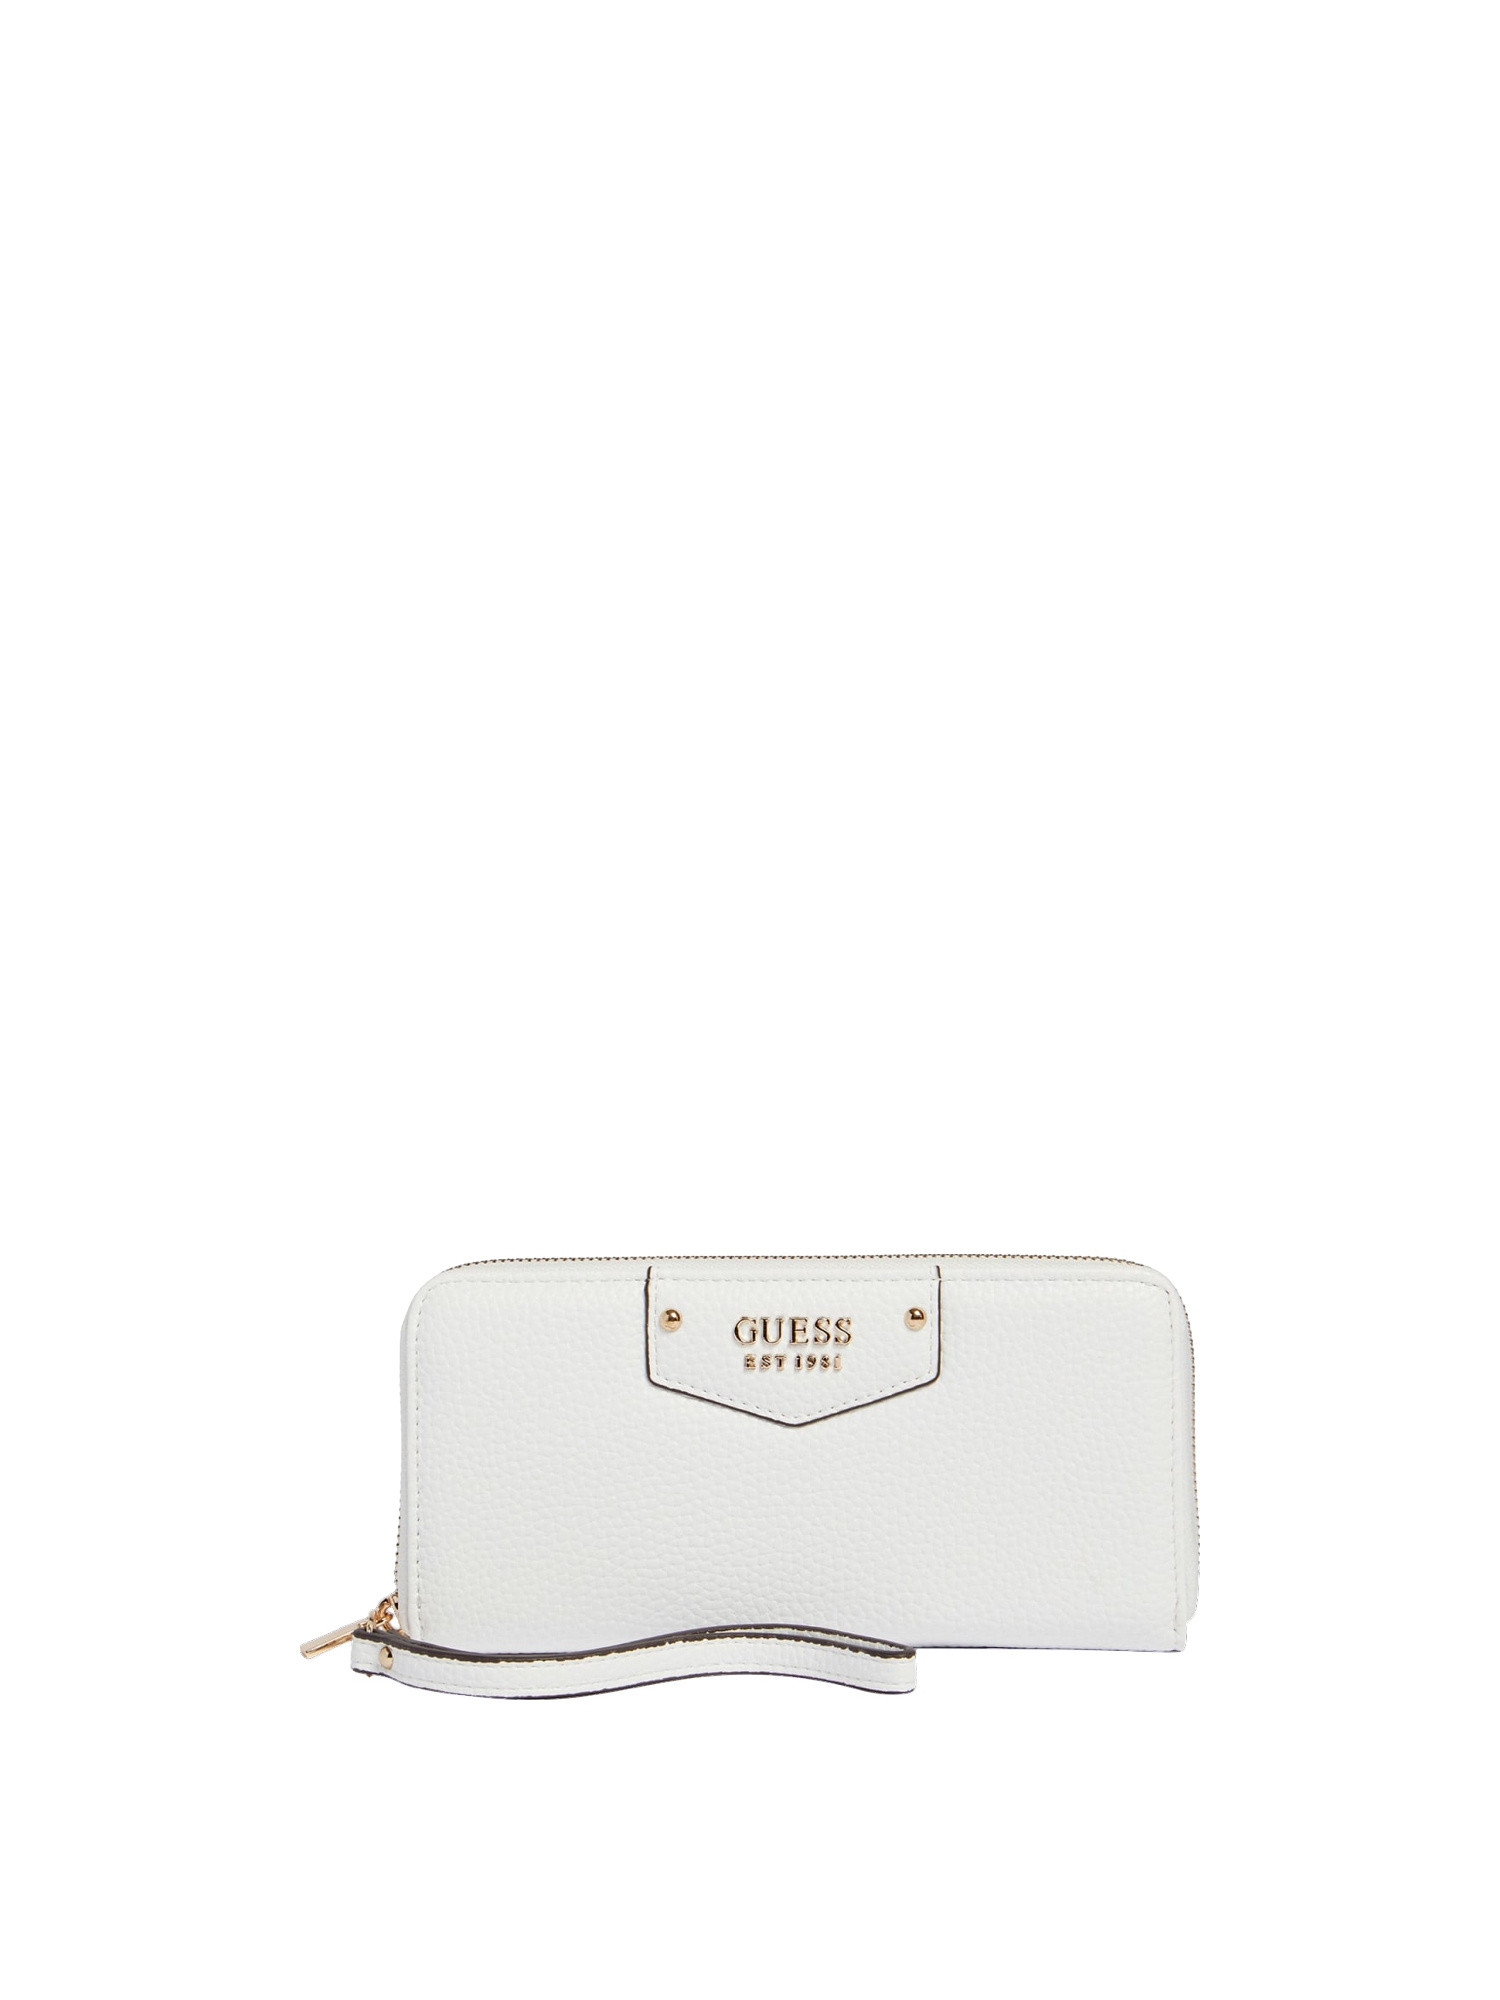 Guess - Brenton eco maxi wallet, White, large image number 0